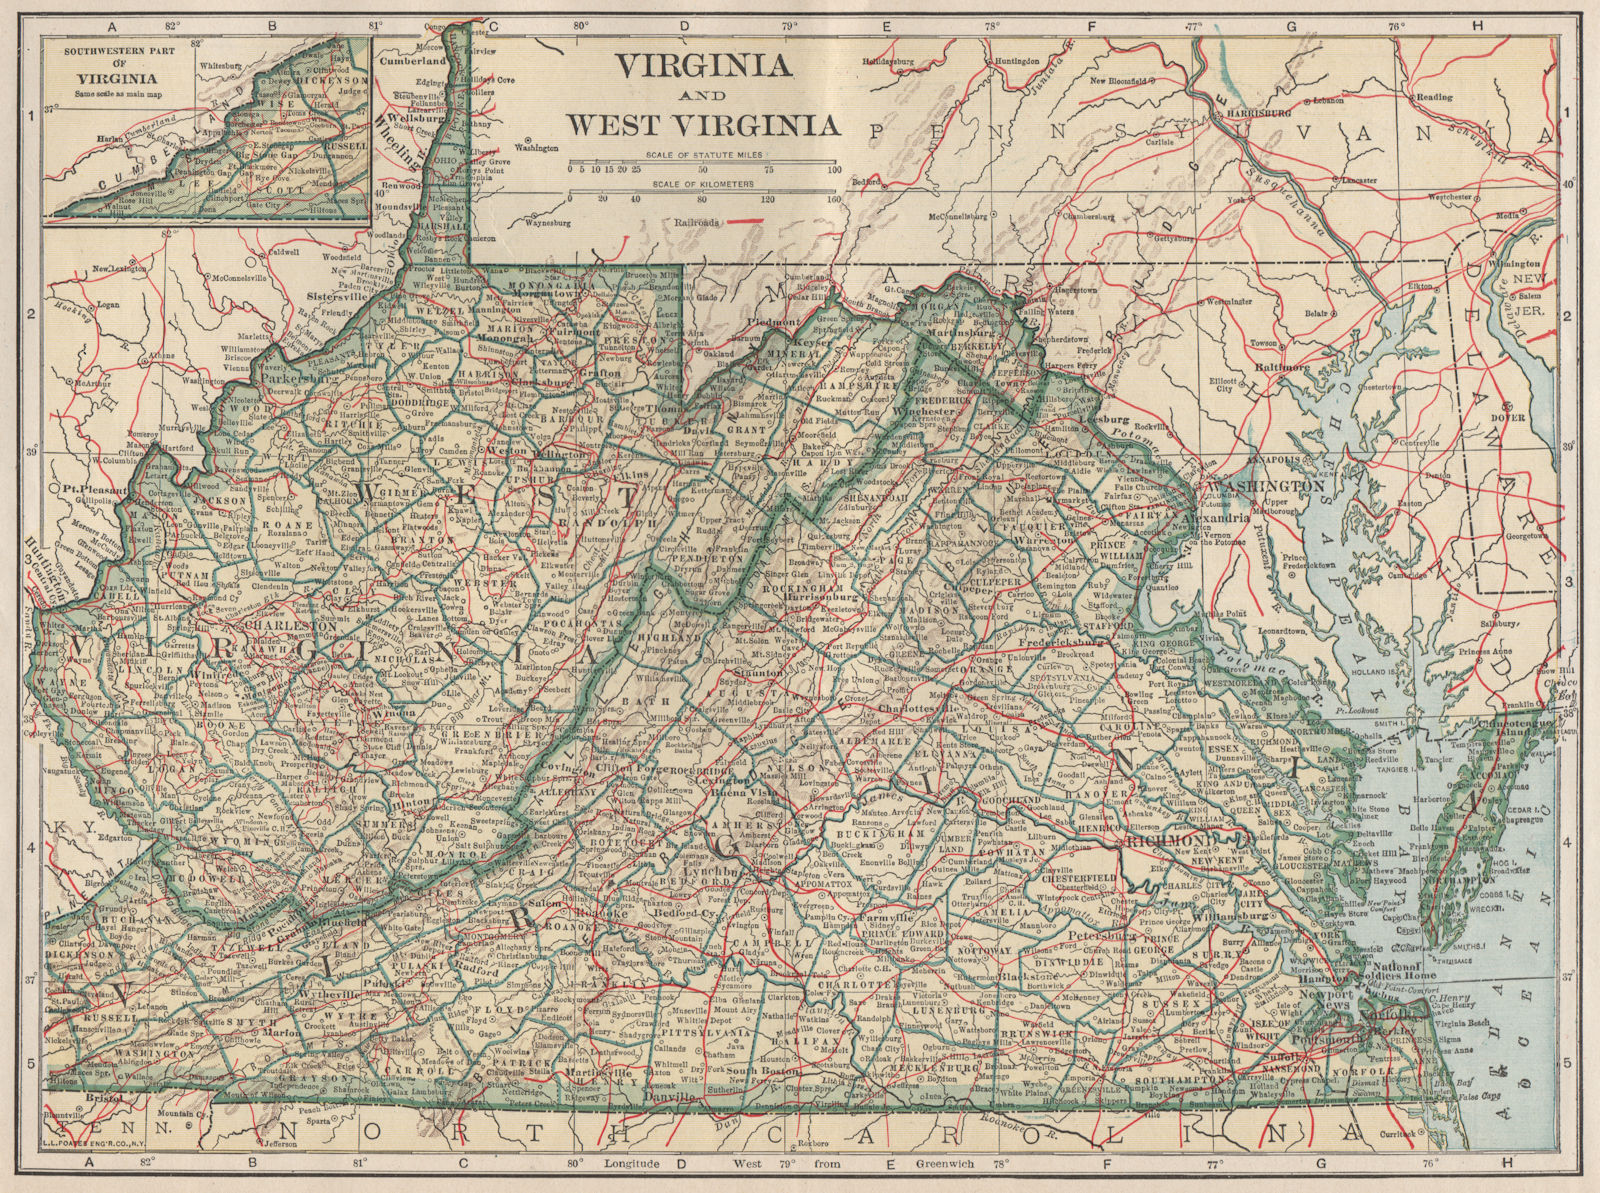 Associate Product Virginia and West Virginia state map showing railroads. POATES 1925 old